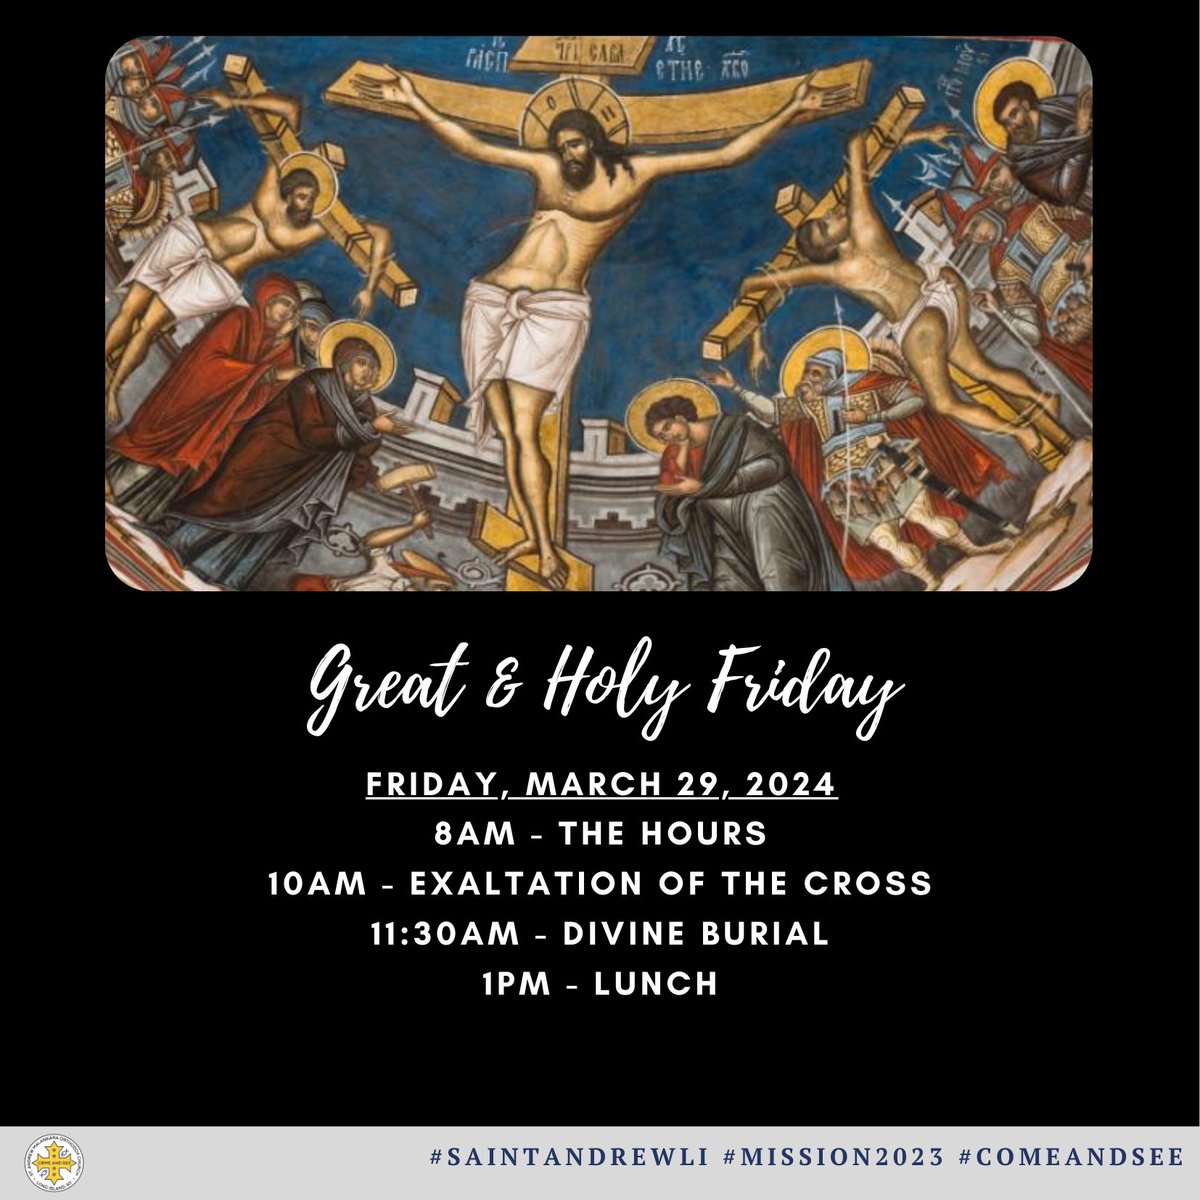 Join #SaintAndrewLI for #Great & #HolyFriday services as we remember the #death of our Lord Jesus Christ upon the #Cross.

#WeFeastAtDeathsSlaughter #GreatLent #HolyWeek #Friday #HolyFriday #GreatFriday #Golgotha #Calvary #Sacrifice #FeastofFeasts #Pascha #Qymtho #ComeAndSee